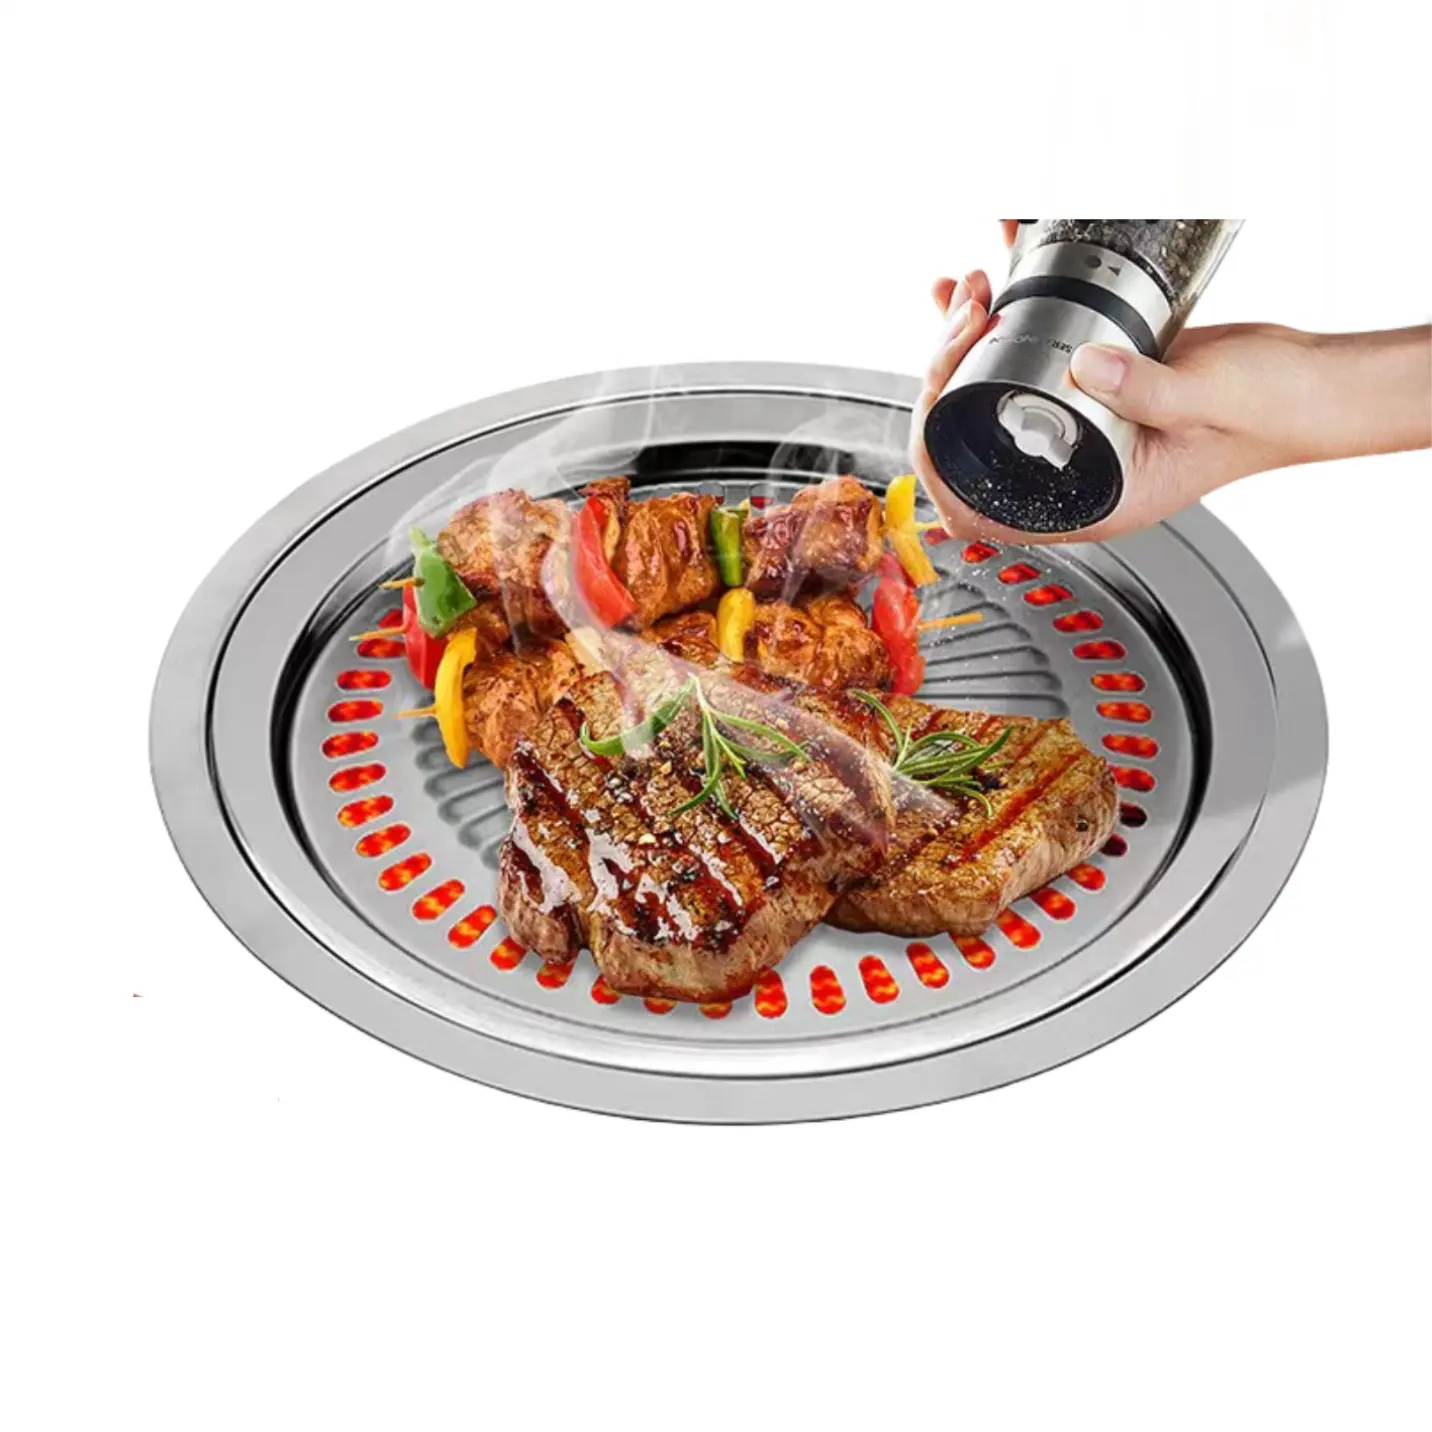 30cm electric infrared cooker grill special barbecue tray household outdoor barbecue cassette stove barbecue supplies gifts